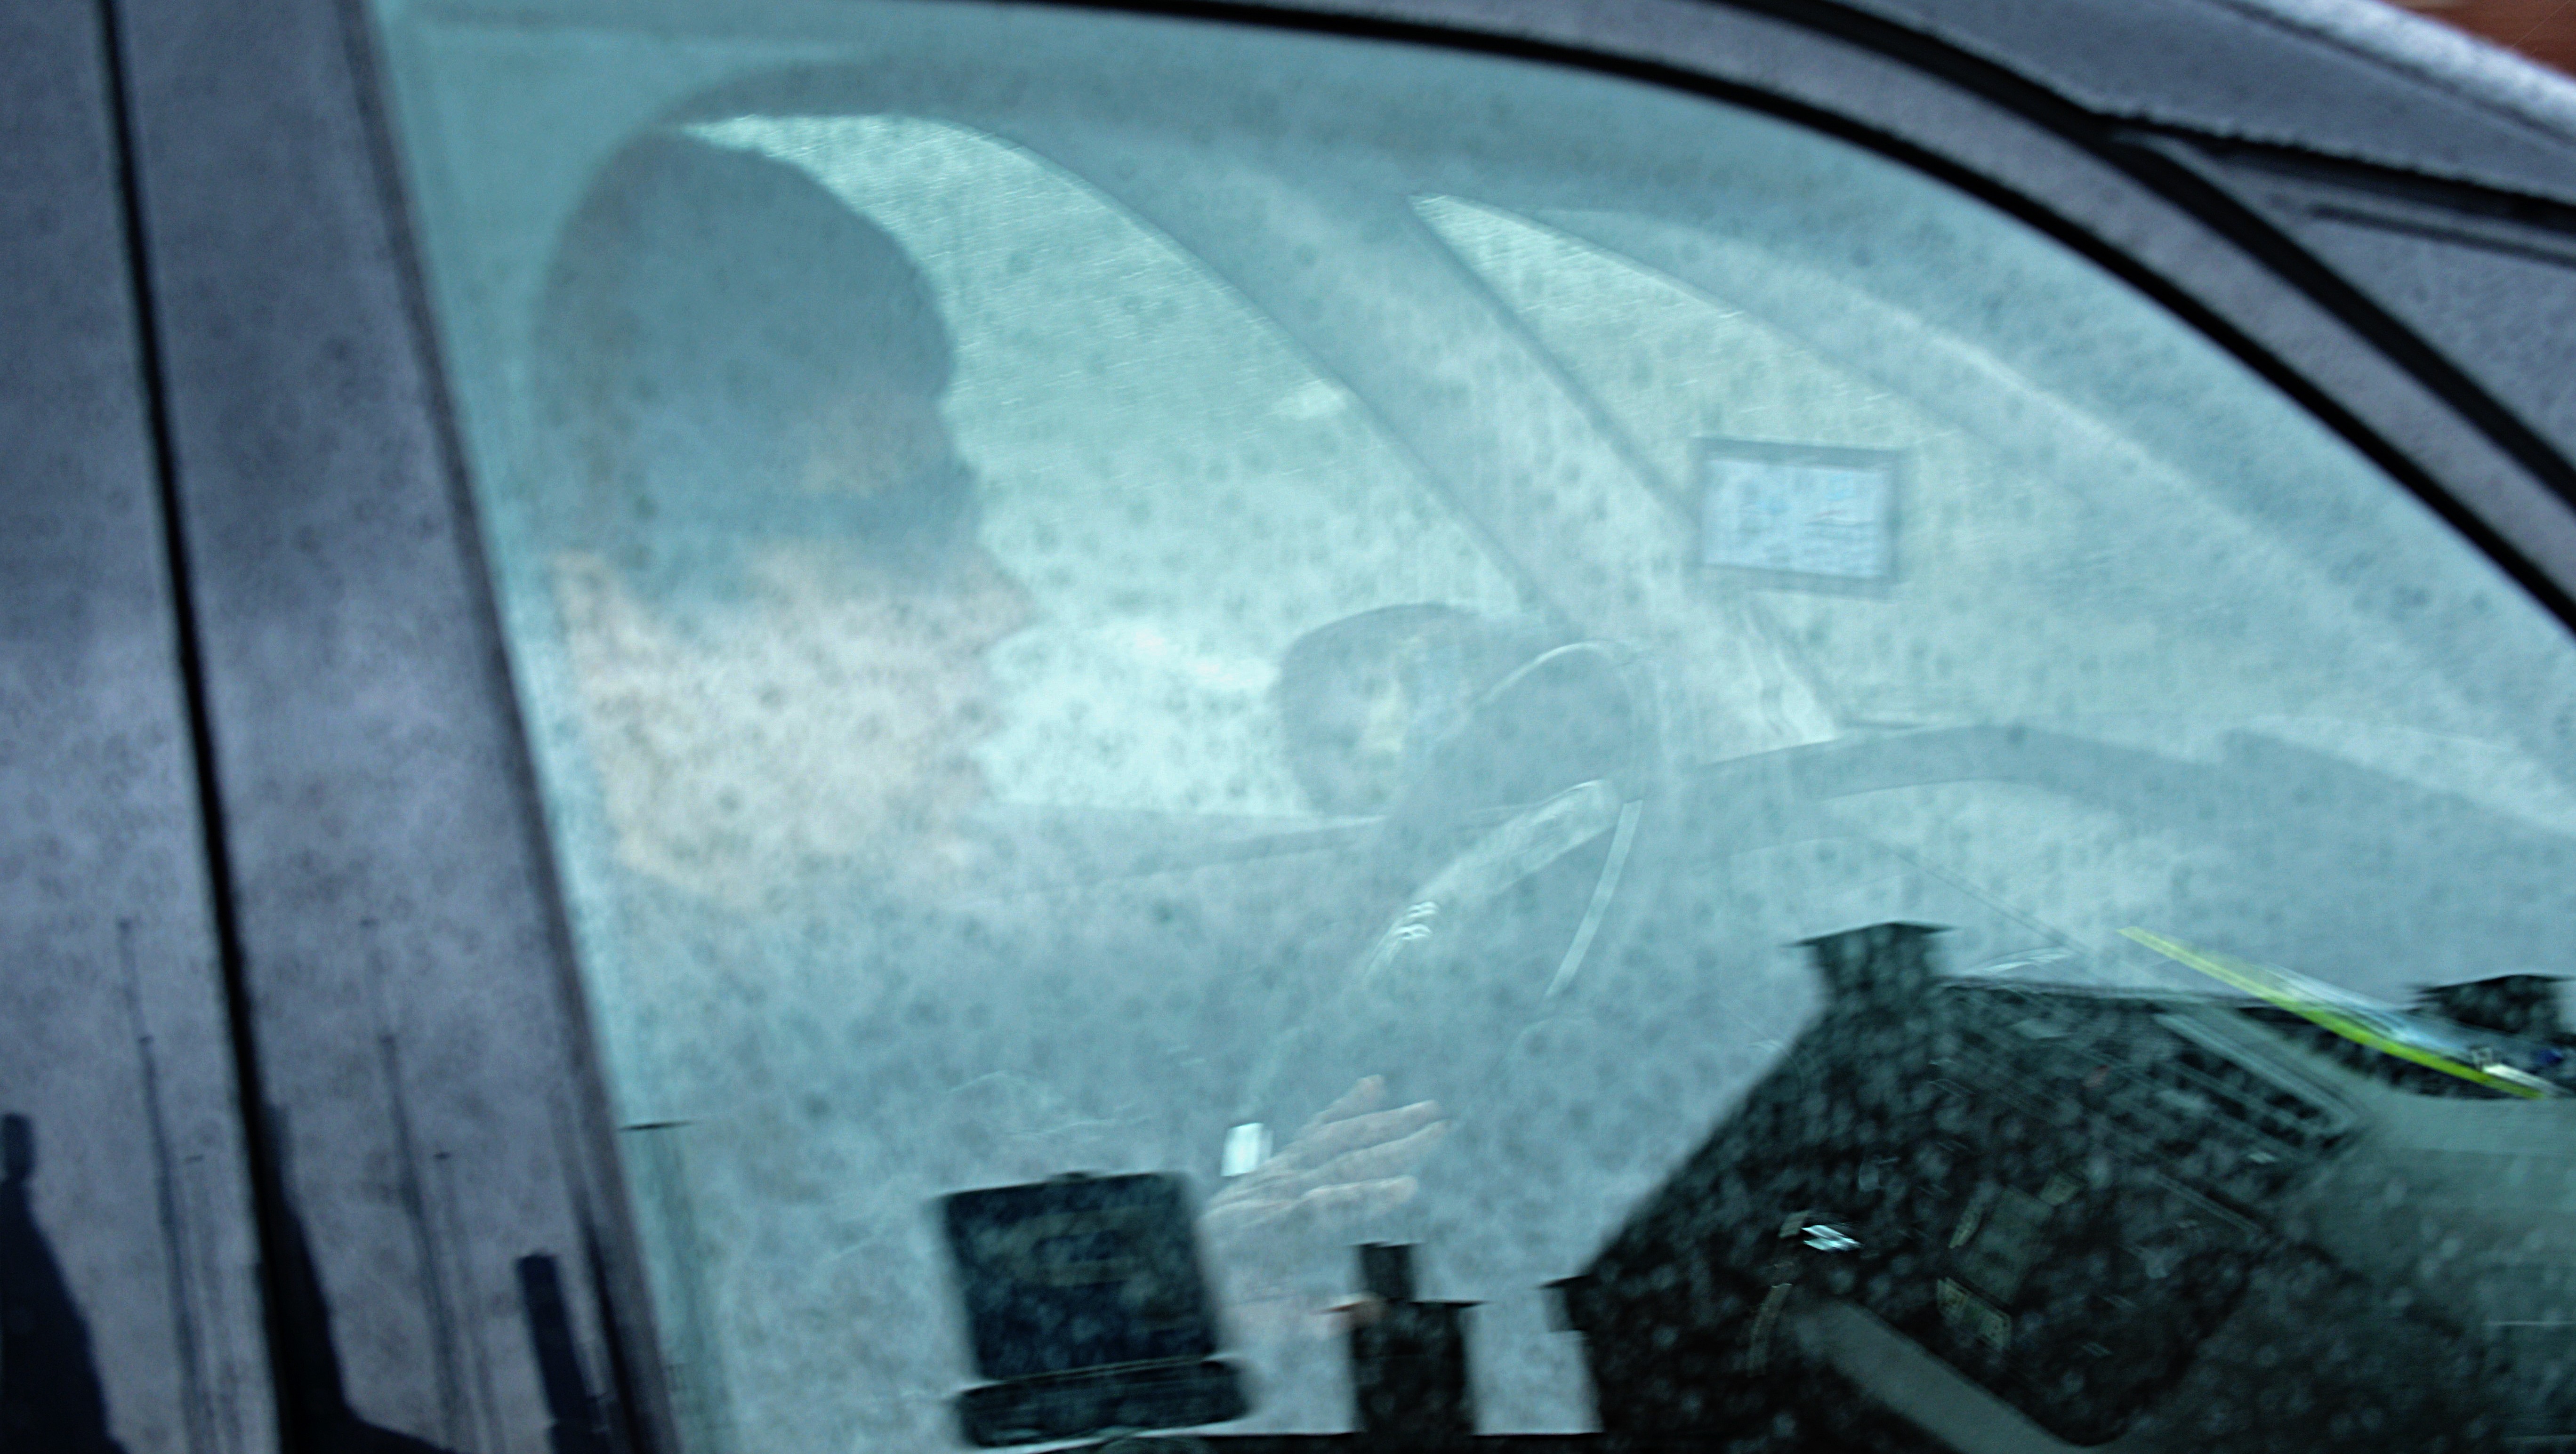 Leopold Storme pictured as he is leaving prison in a taxi, on Tuesday 28 February 2017, in Nivelles. Storme was sentenced to 26 years in jail on Wednesday 27 October 2010. He was convicted for the murder on his parents Francois-Xavier Storme and Caroline Van Oost and his sister Carlouchka on 16 June 2007 in their shop in the Brussels Marollen-Marolles neighbourhood.  BELGA PHOTO JEAN-LUC FLEMAL